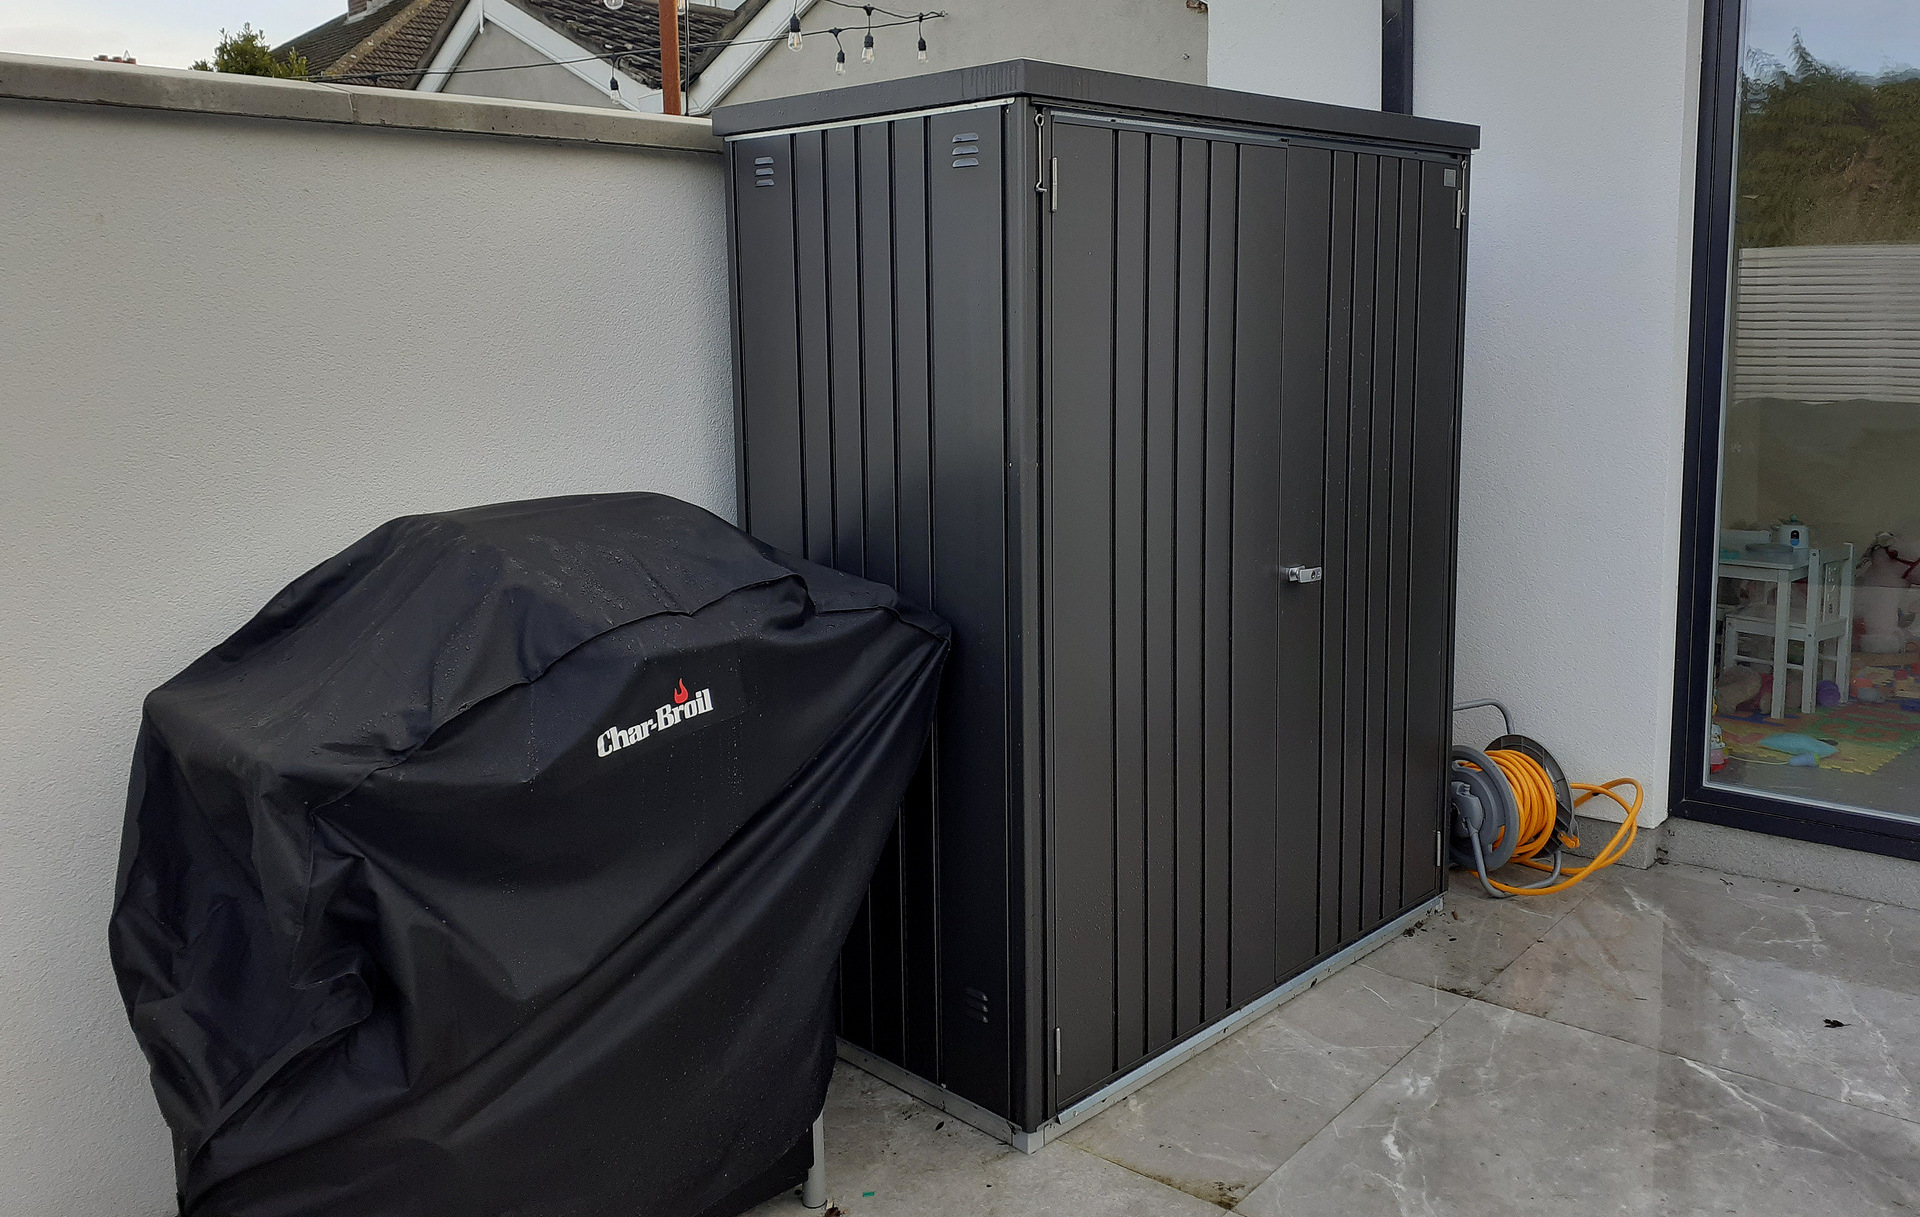 The superb quality and style of the Biohort Equipment Locker 150 in metallic dark grey  with optional accessories including aluminium floor frame, aluminium floor panels | supplied + installed in Goatstown, Dublin 14 by Owen Chubb Landscapers. Tel 087-2306 128.